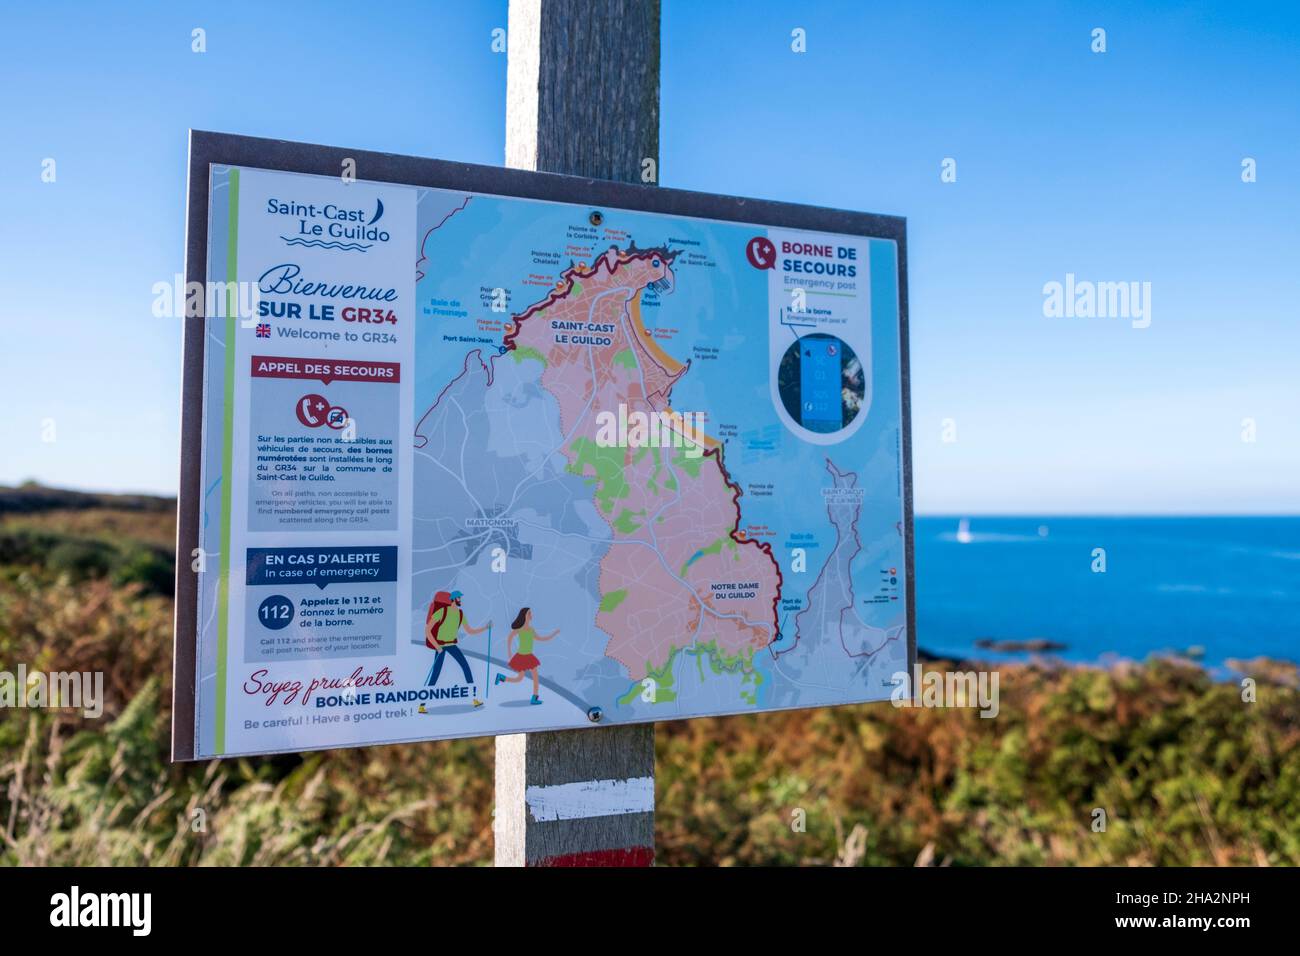 Sign indicating the GR34 coastal path along the coastline, in Saint-Cast-le-Guildo (Brittany, north-western France) Stock Photo